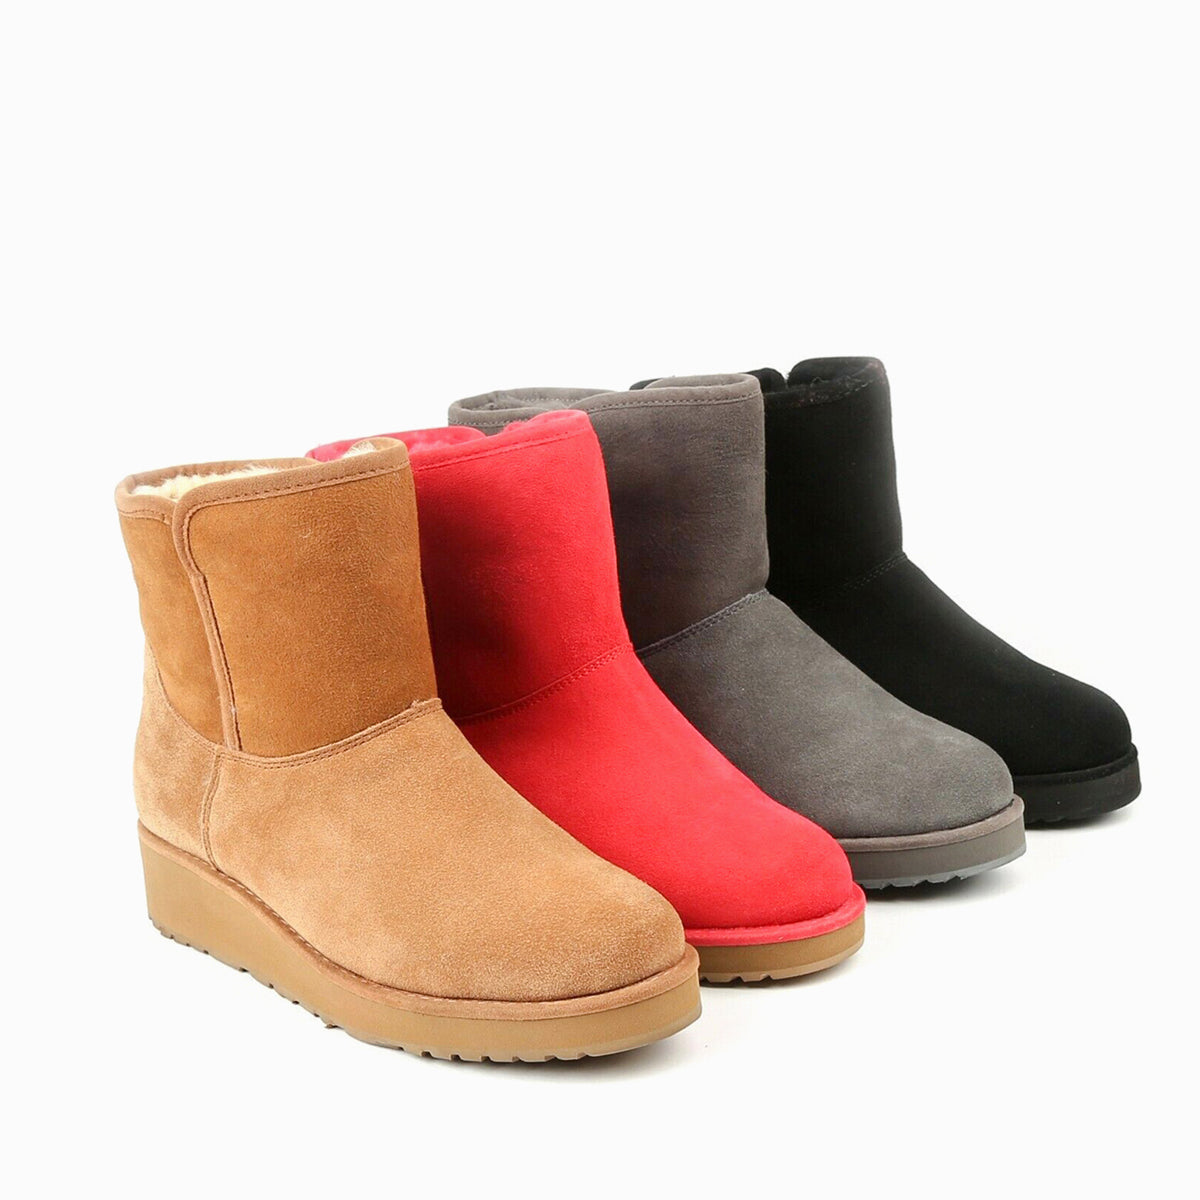 SIZE 35 - UGG MIA CLASSIC SHORT SLIM BOOTS (WATER RESISTANT)